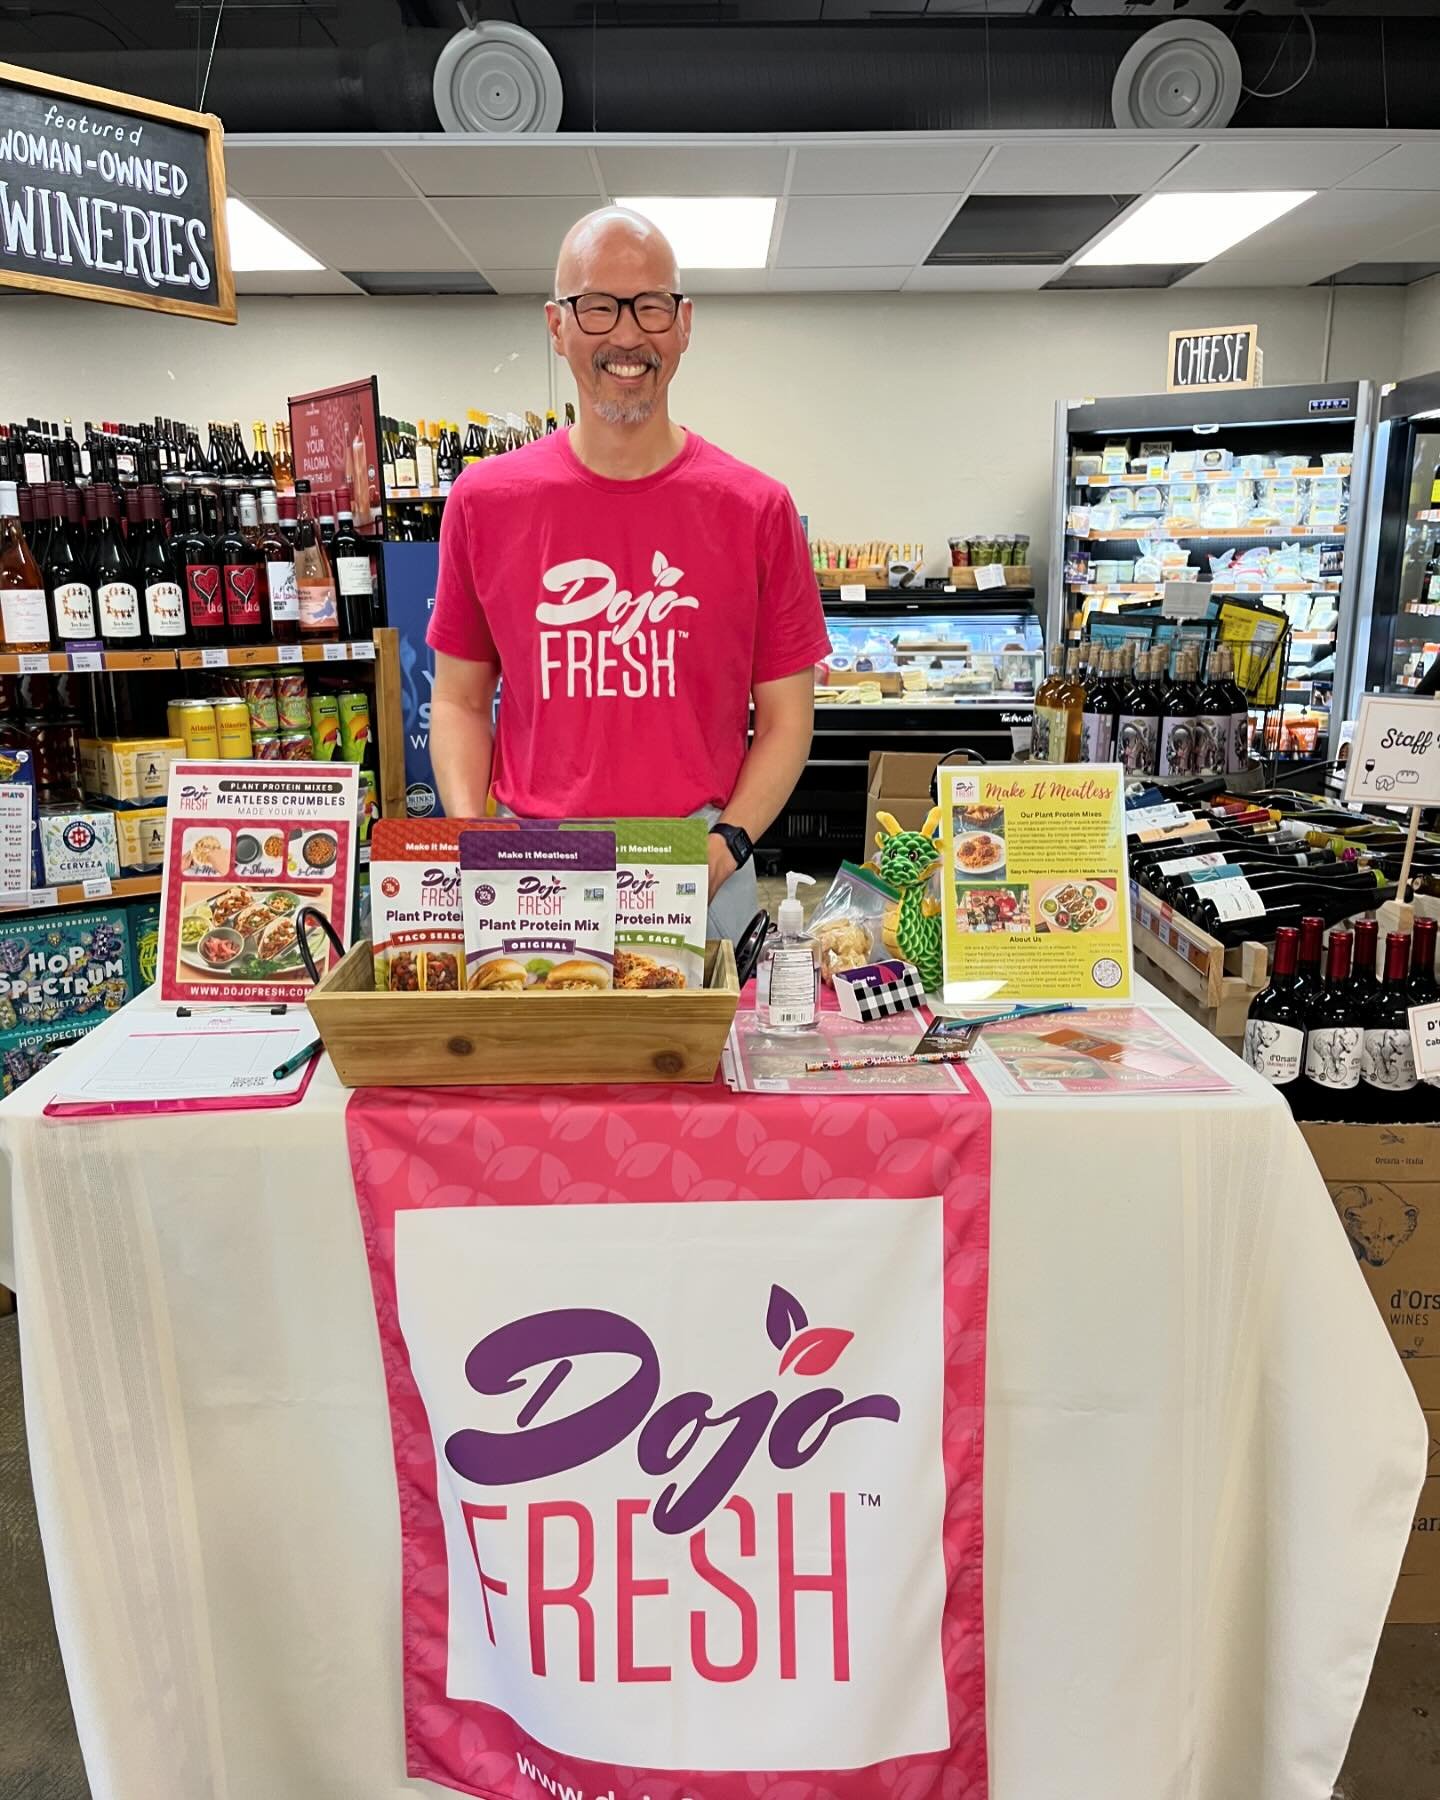 @dojofresh is here sampling today! Try their plant-based taco seasoned protein mix, perfect for your cinco shenanigans.